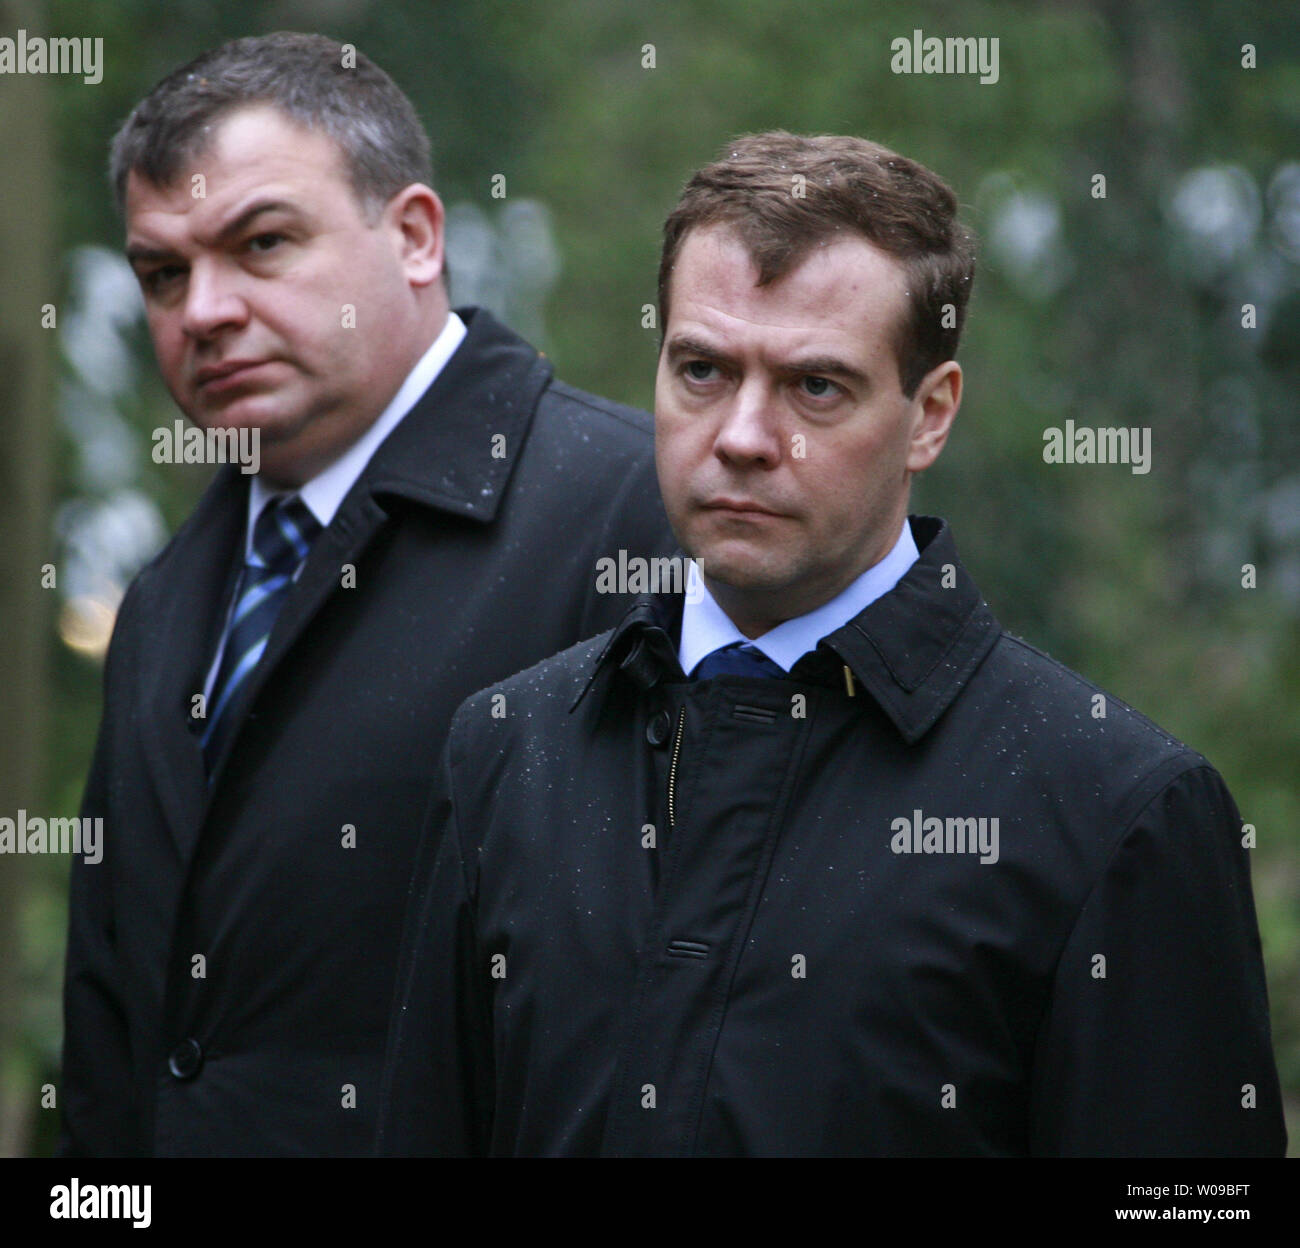 Russian President Dmitry Medvedev (R) with Defense Minister Anatoly Serdyukov  inspects a missile base in Teikovo, 250 km (150 miles) northeast of Moscow on May 15, 2008. Medvedev promised on Thursday to provide the necessary funding for Russian nuclear forces to counter global threats. (UPI Photo/Anatoli Zhdanov) Stock Photo